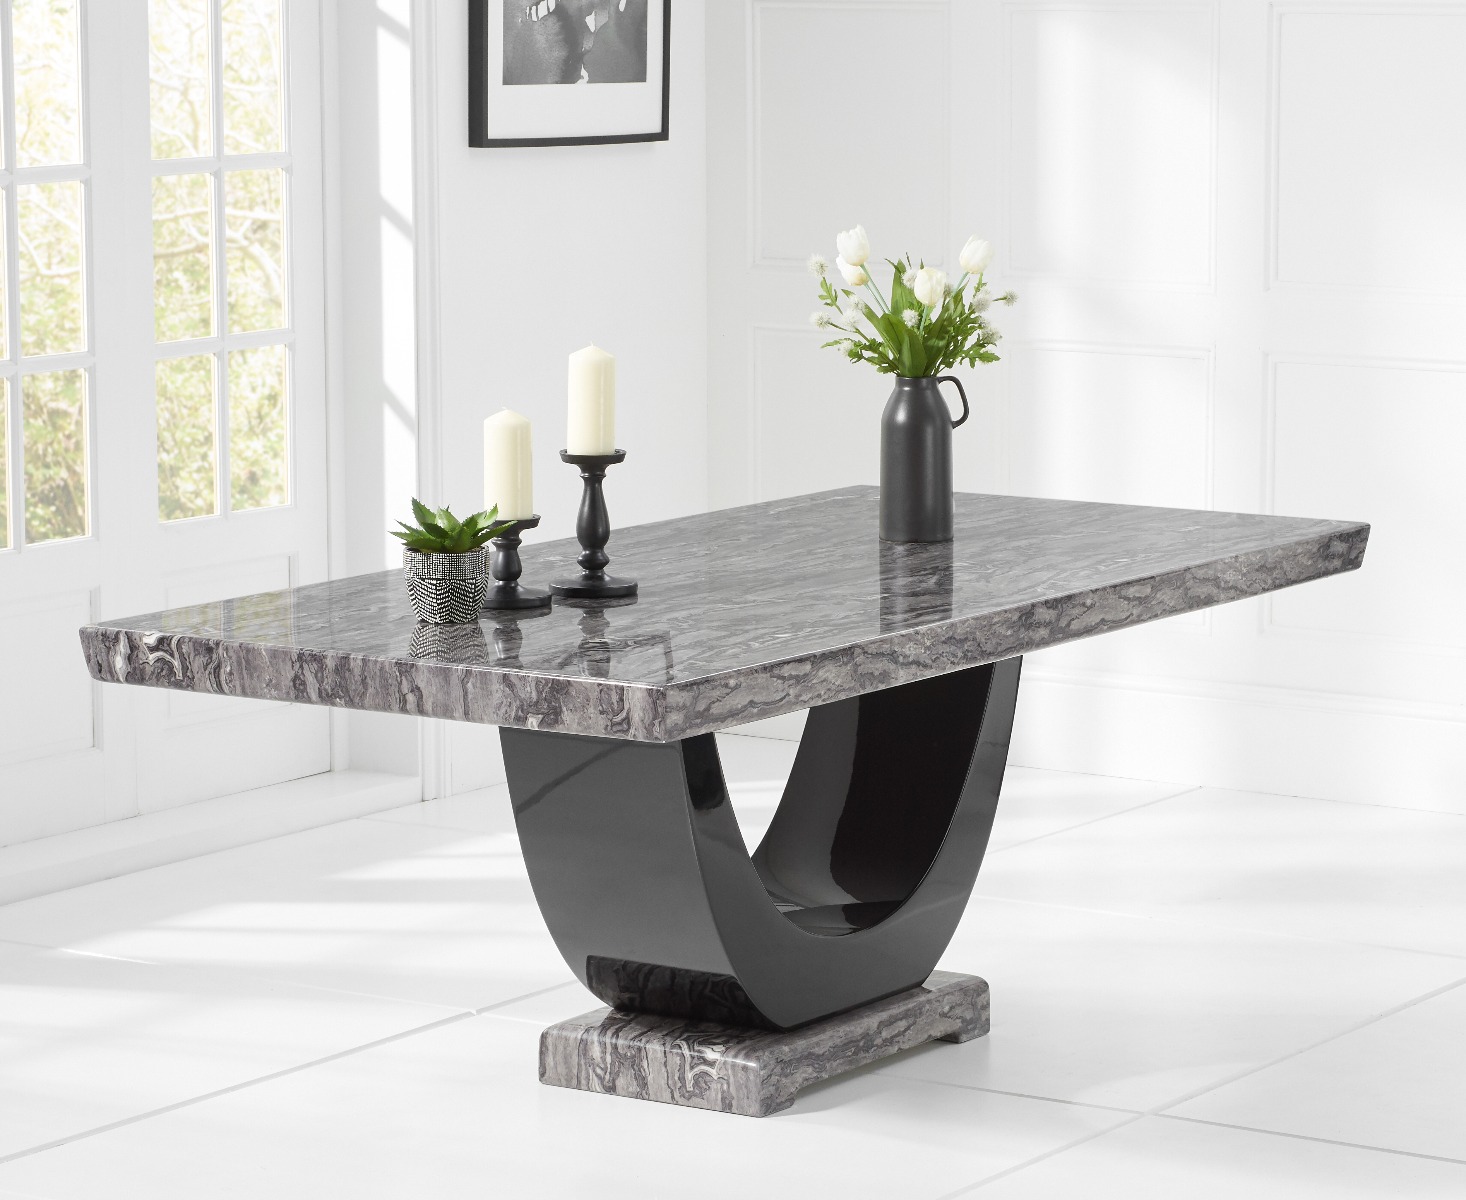 Photo 4 of Raphael 170cm dark grey pedestal marble dining table with 4 cream sophia chairs